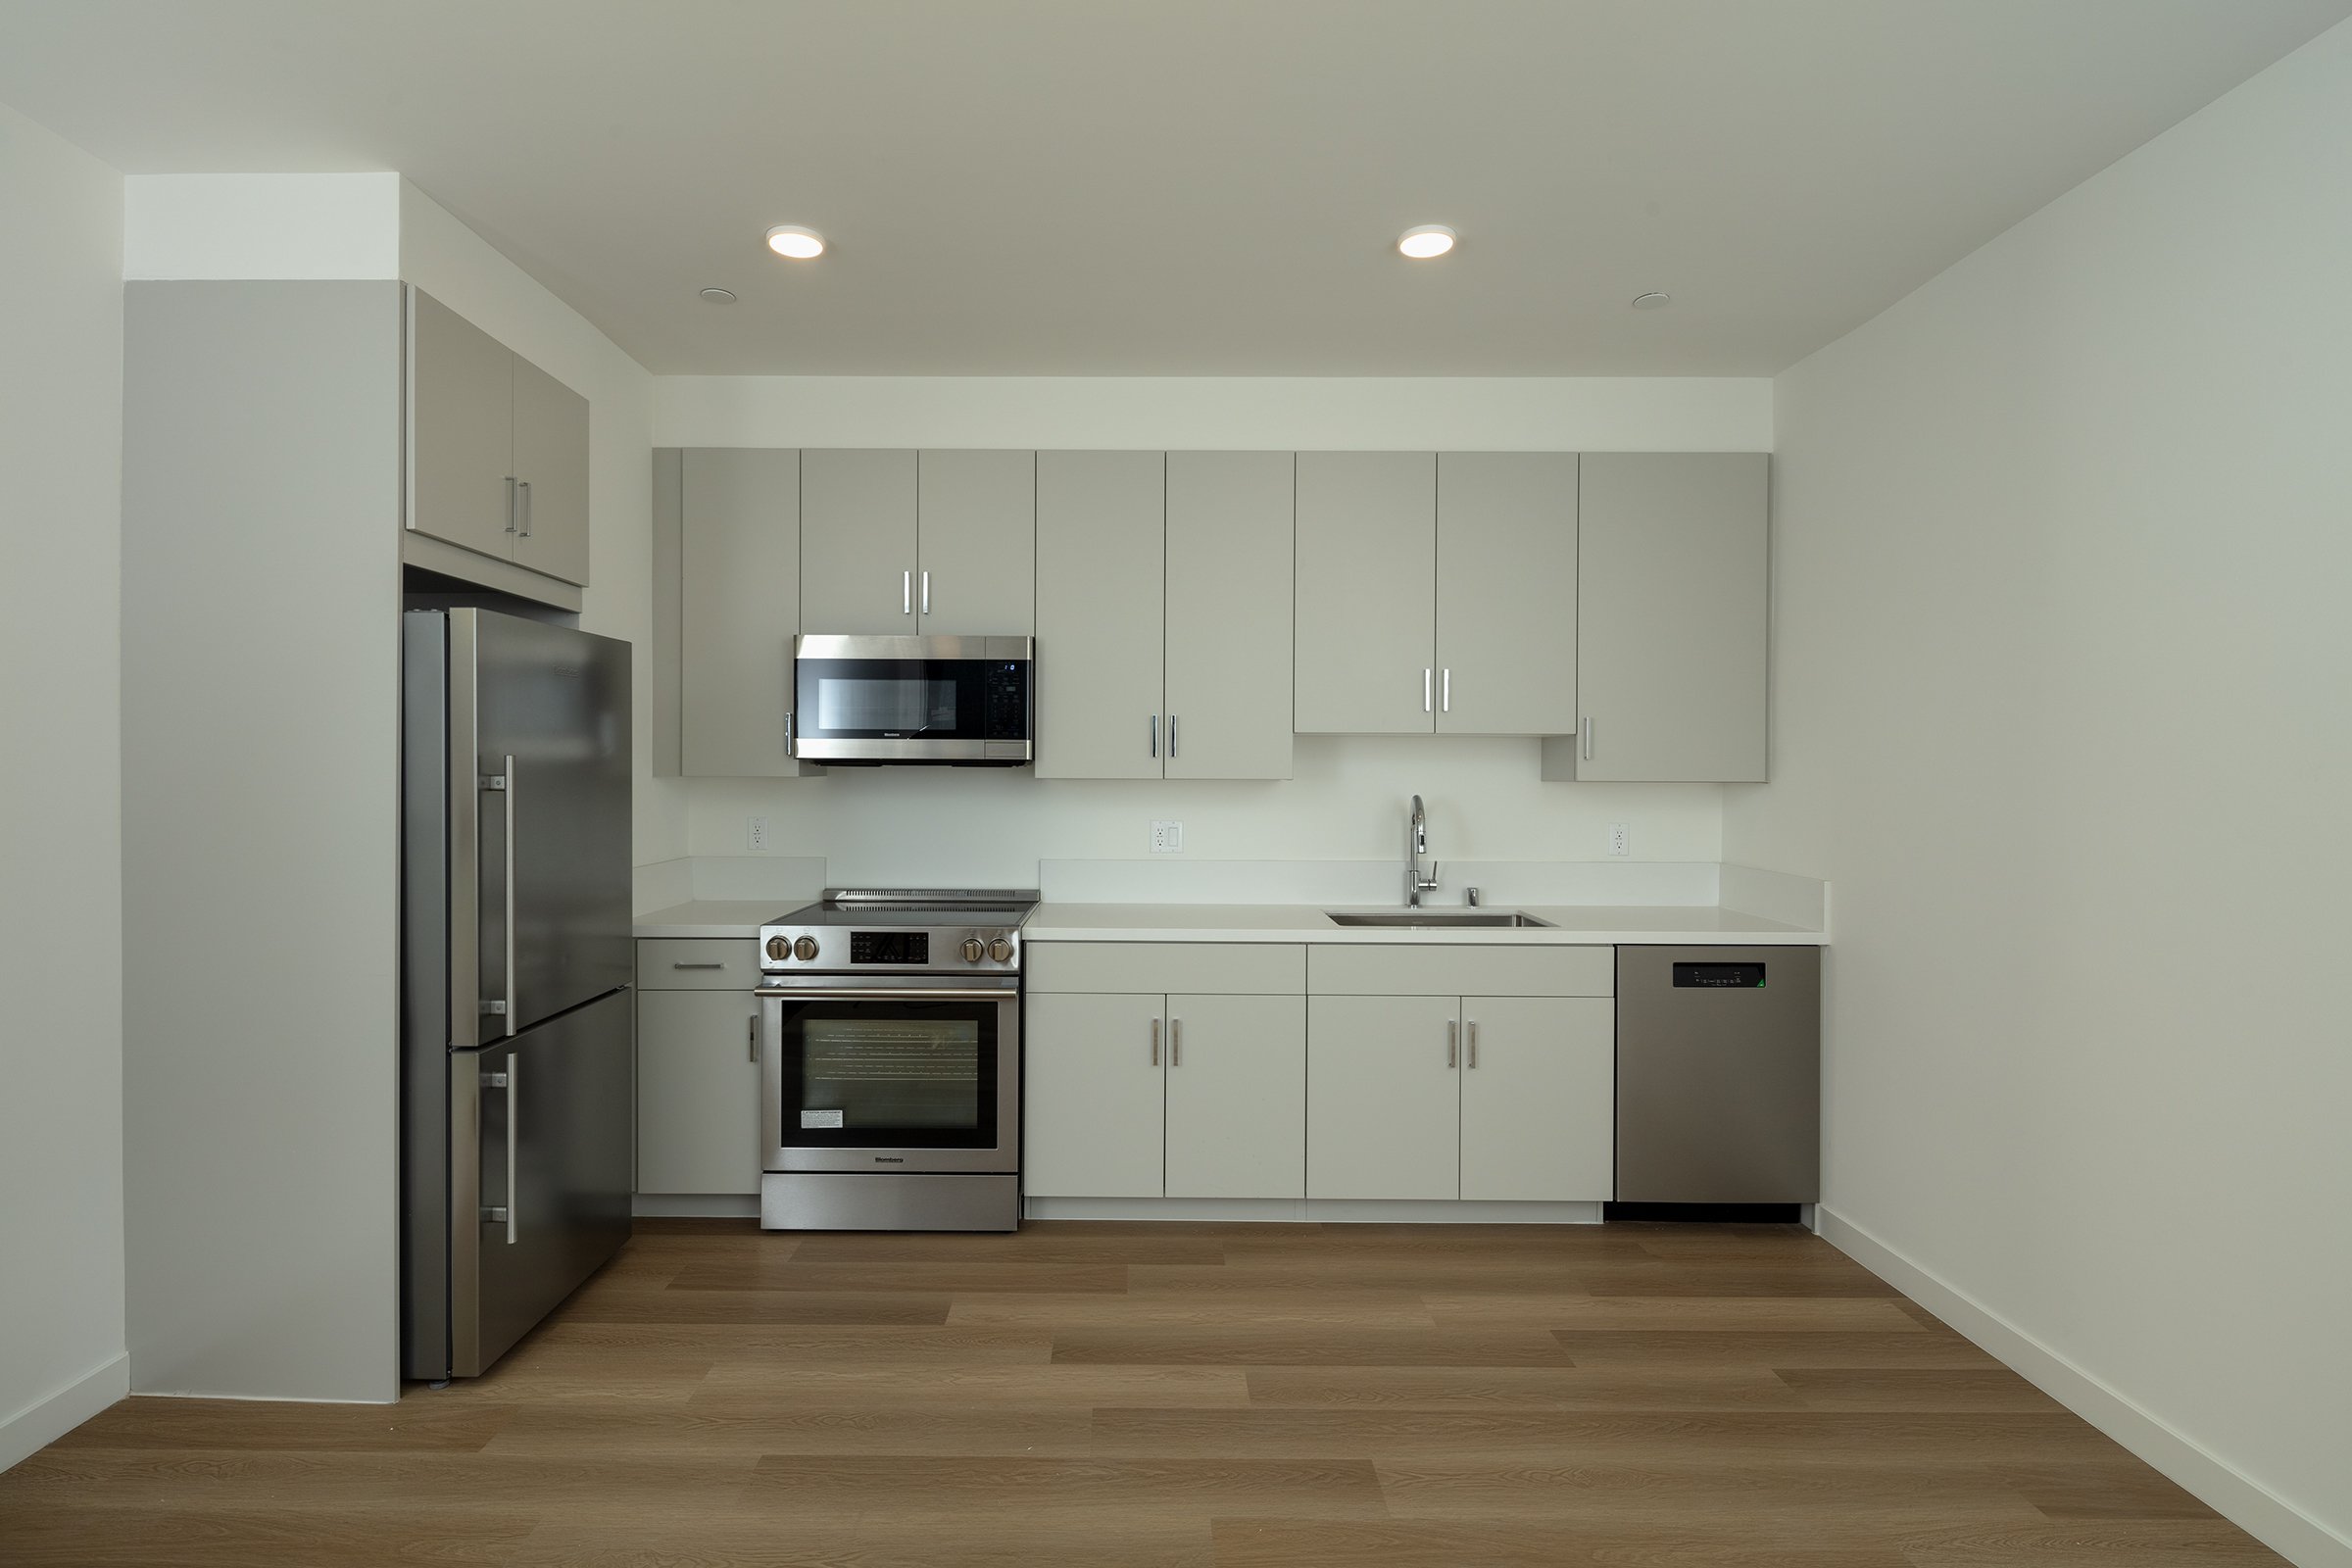 aero-collective-dunsmuir-row-multifamily-kitchen-cabinets.jpg